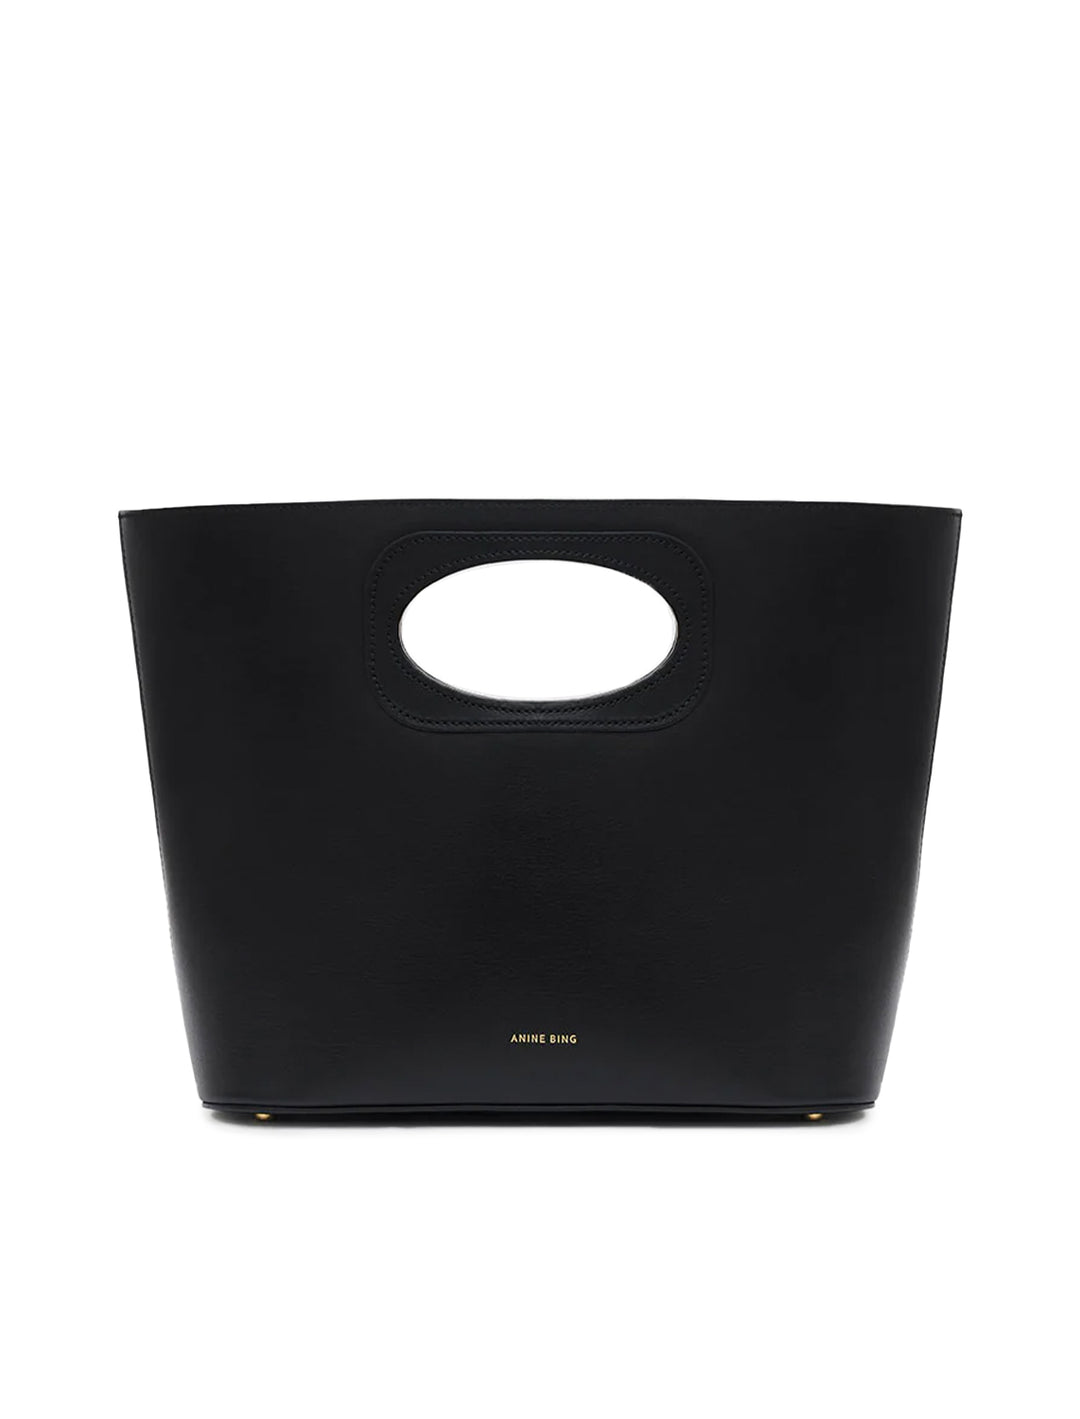 Front view of Anine Bing's mogeh tote in black.